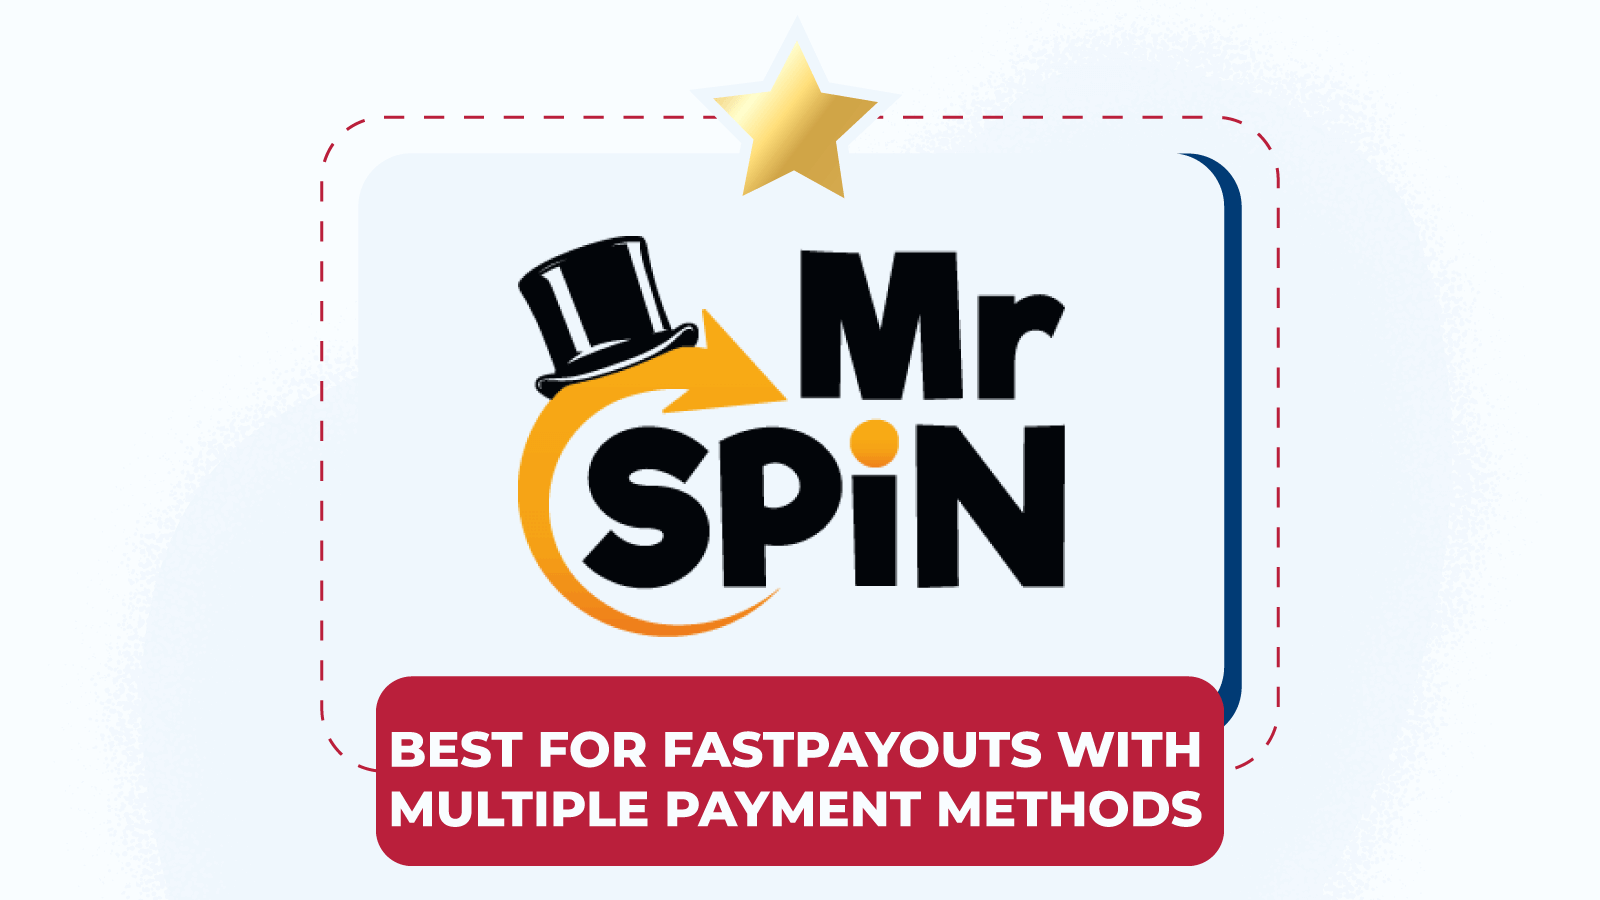 Mr Spin – Best for fast payouts with multiple payment methods